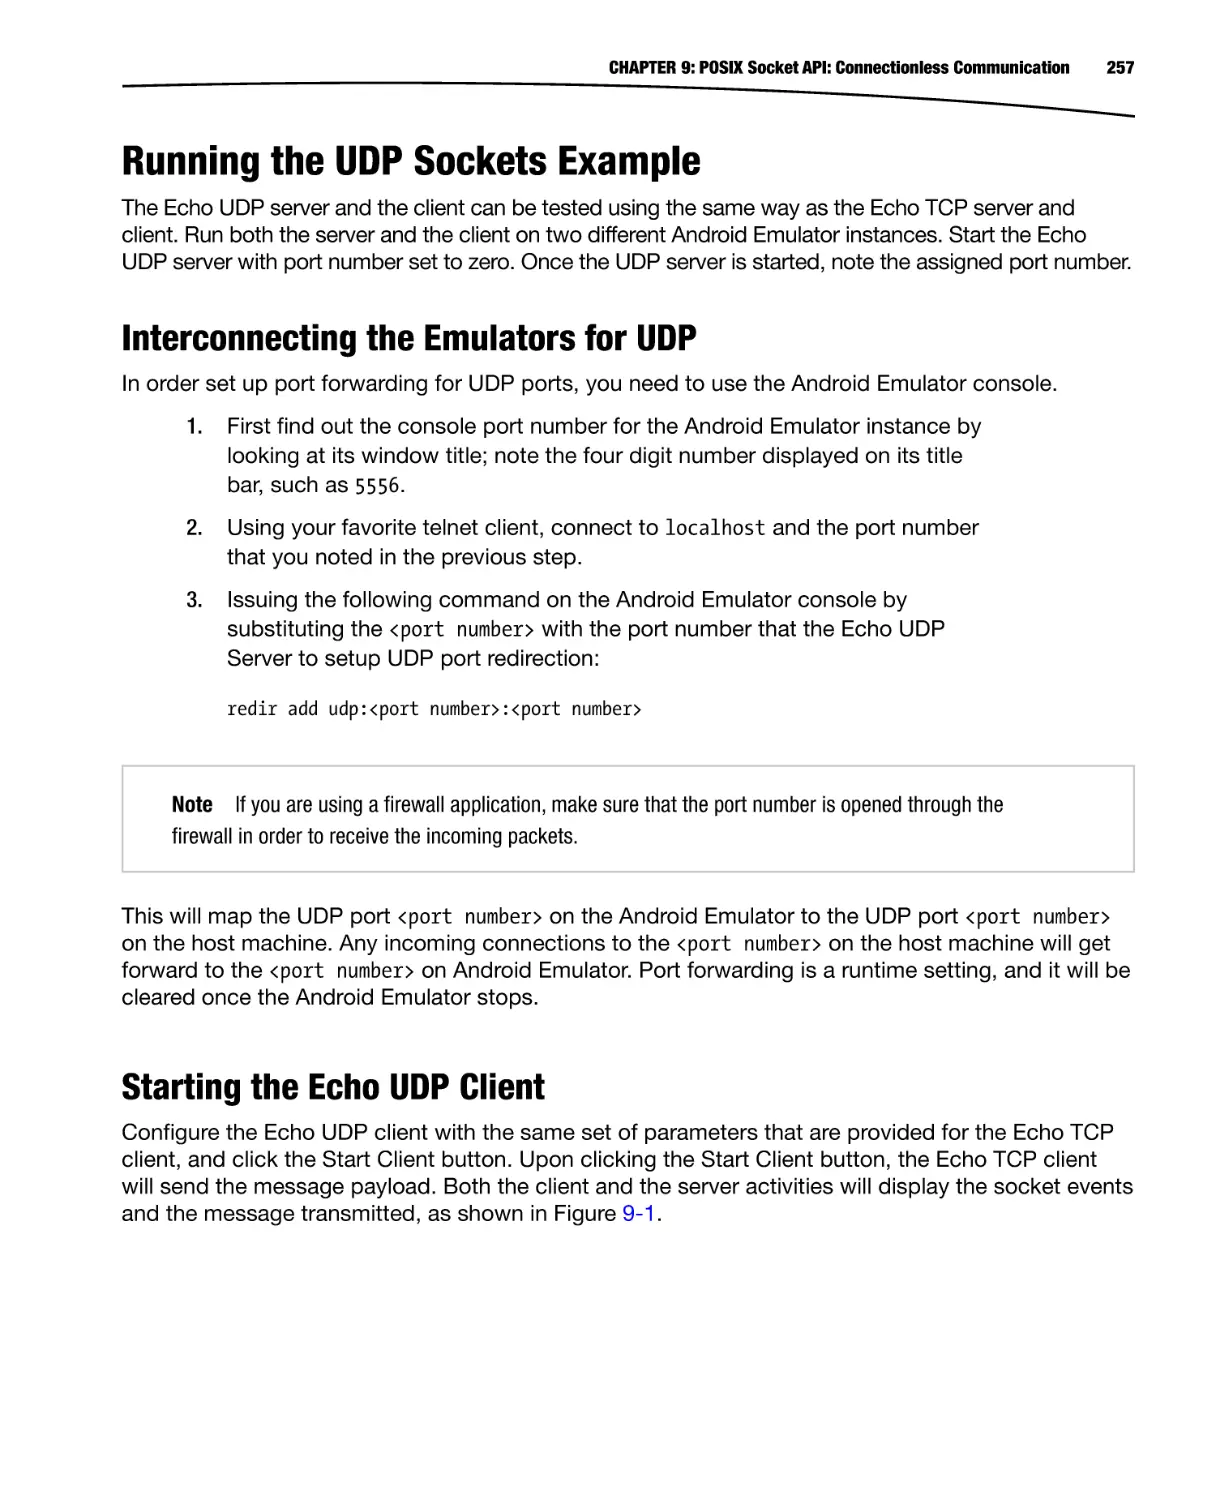 Running the UDP Sockets Example
Interconnecting the Emulators for UDP
Starting the Echo UDP Client